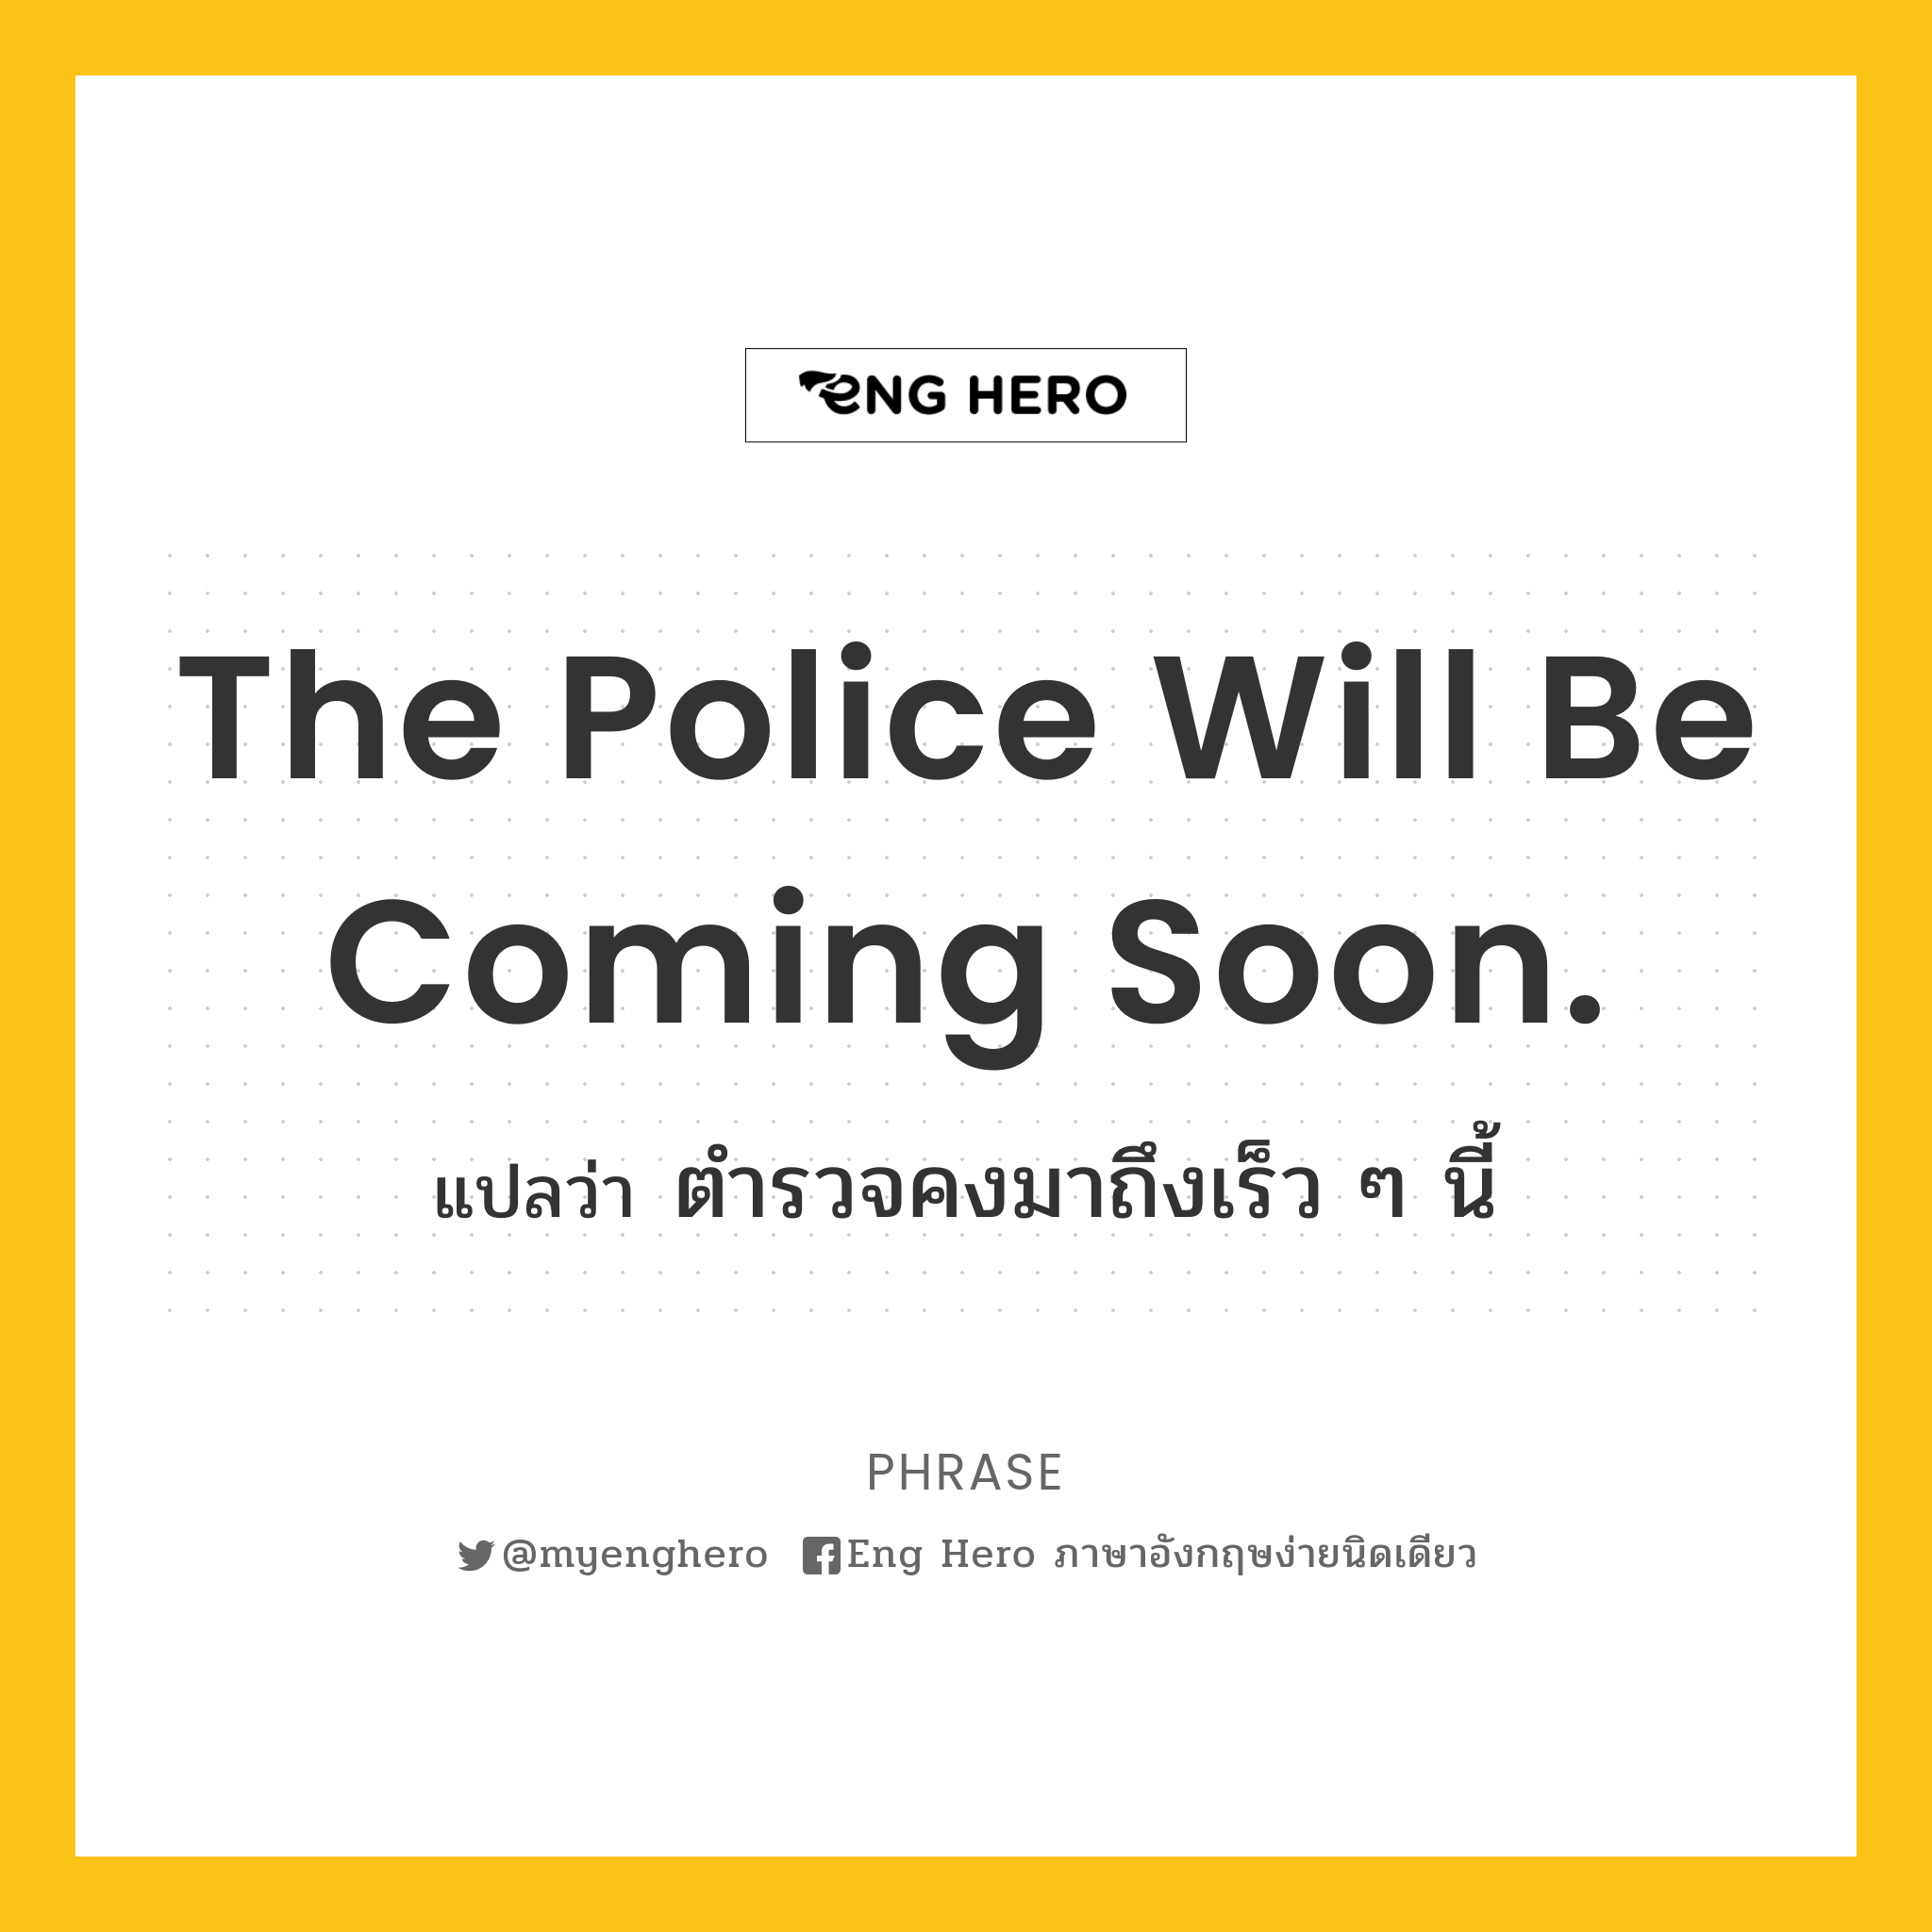 The police will be coming soon.